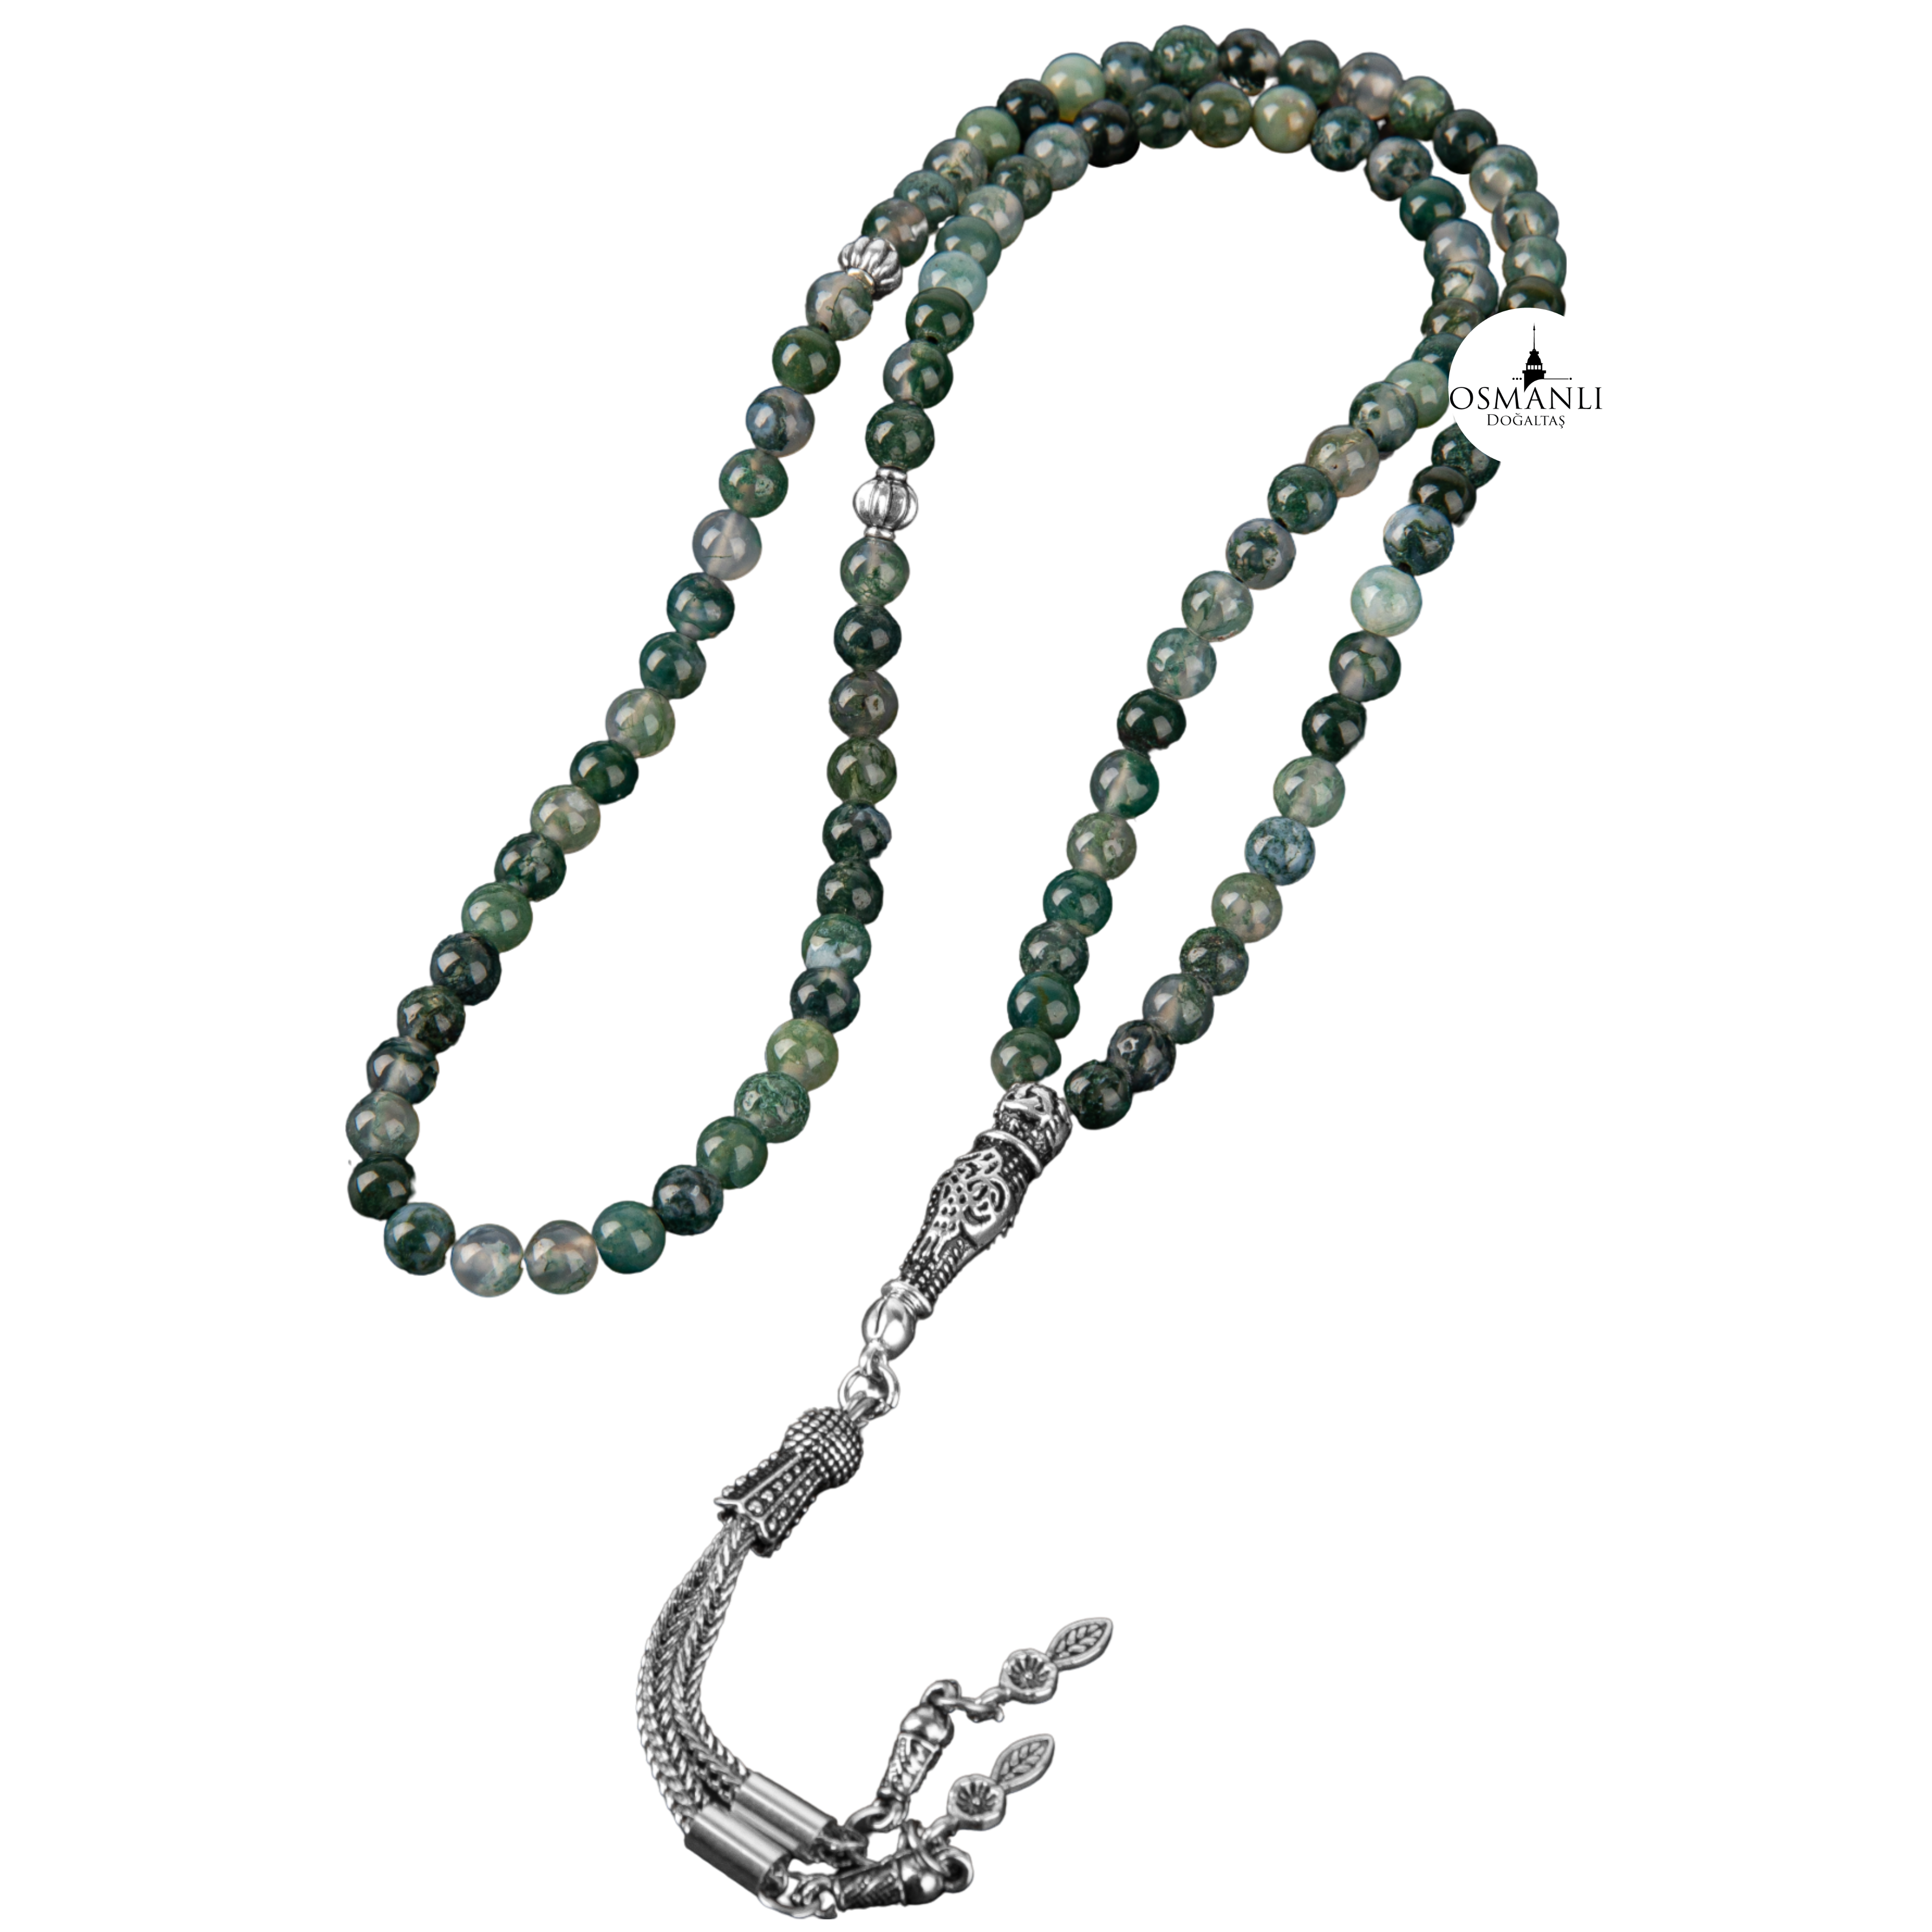 Mossy Agate Natural Stone Prayer Beads 99 - 6mm